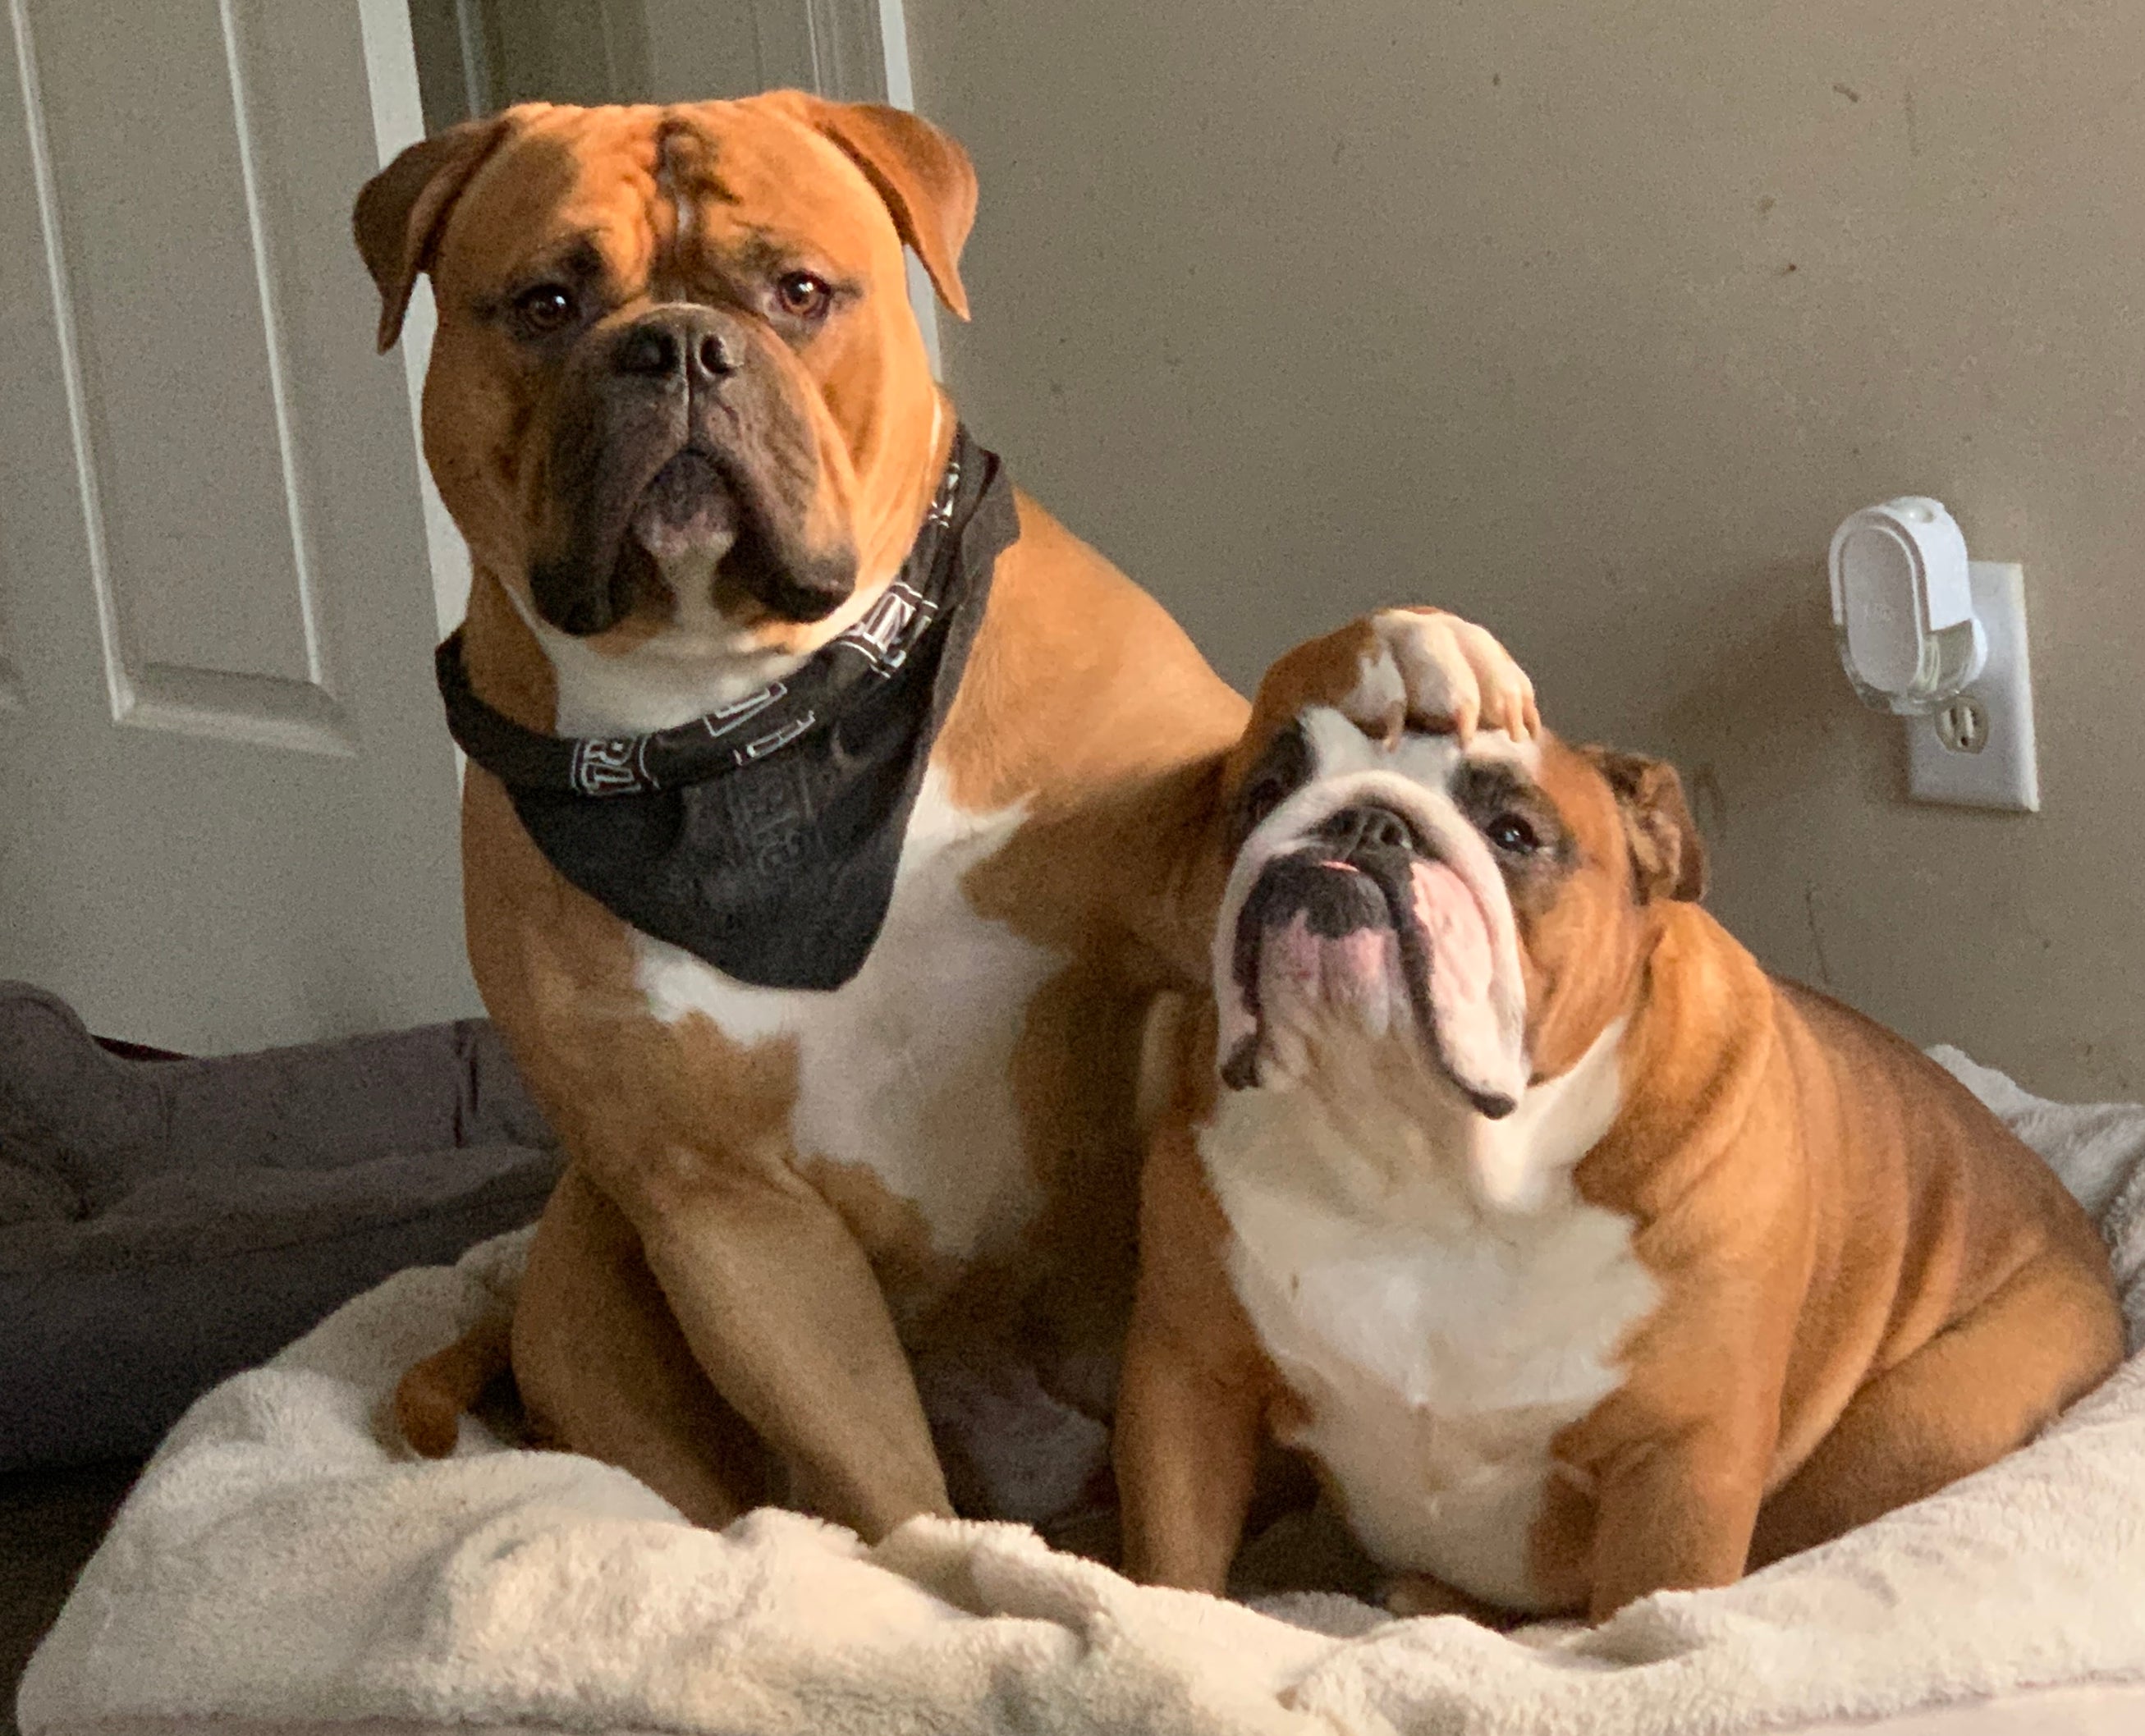 Two bulldogs sitting close together on a dog bed, the bigger dog has his paw on the head of the smaller one